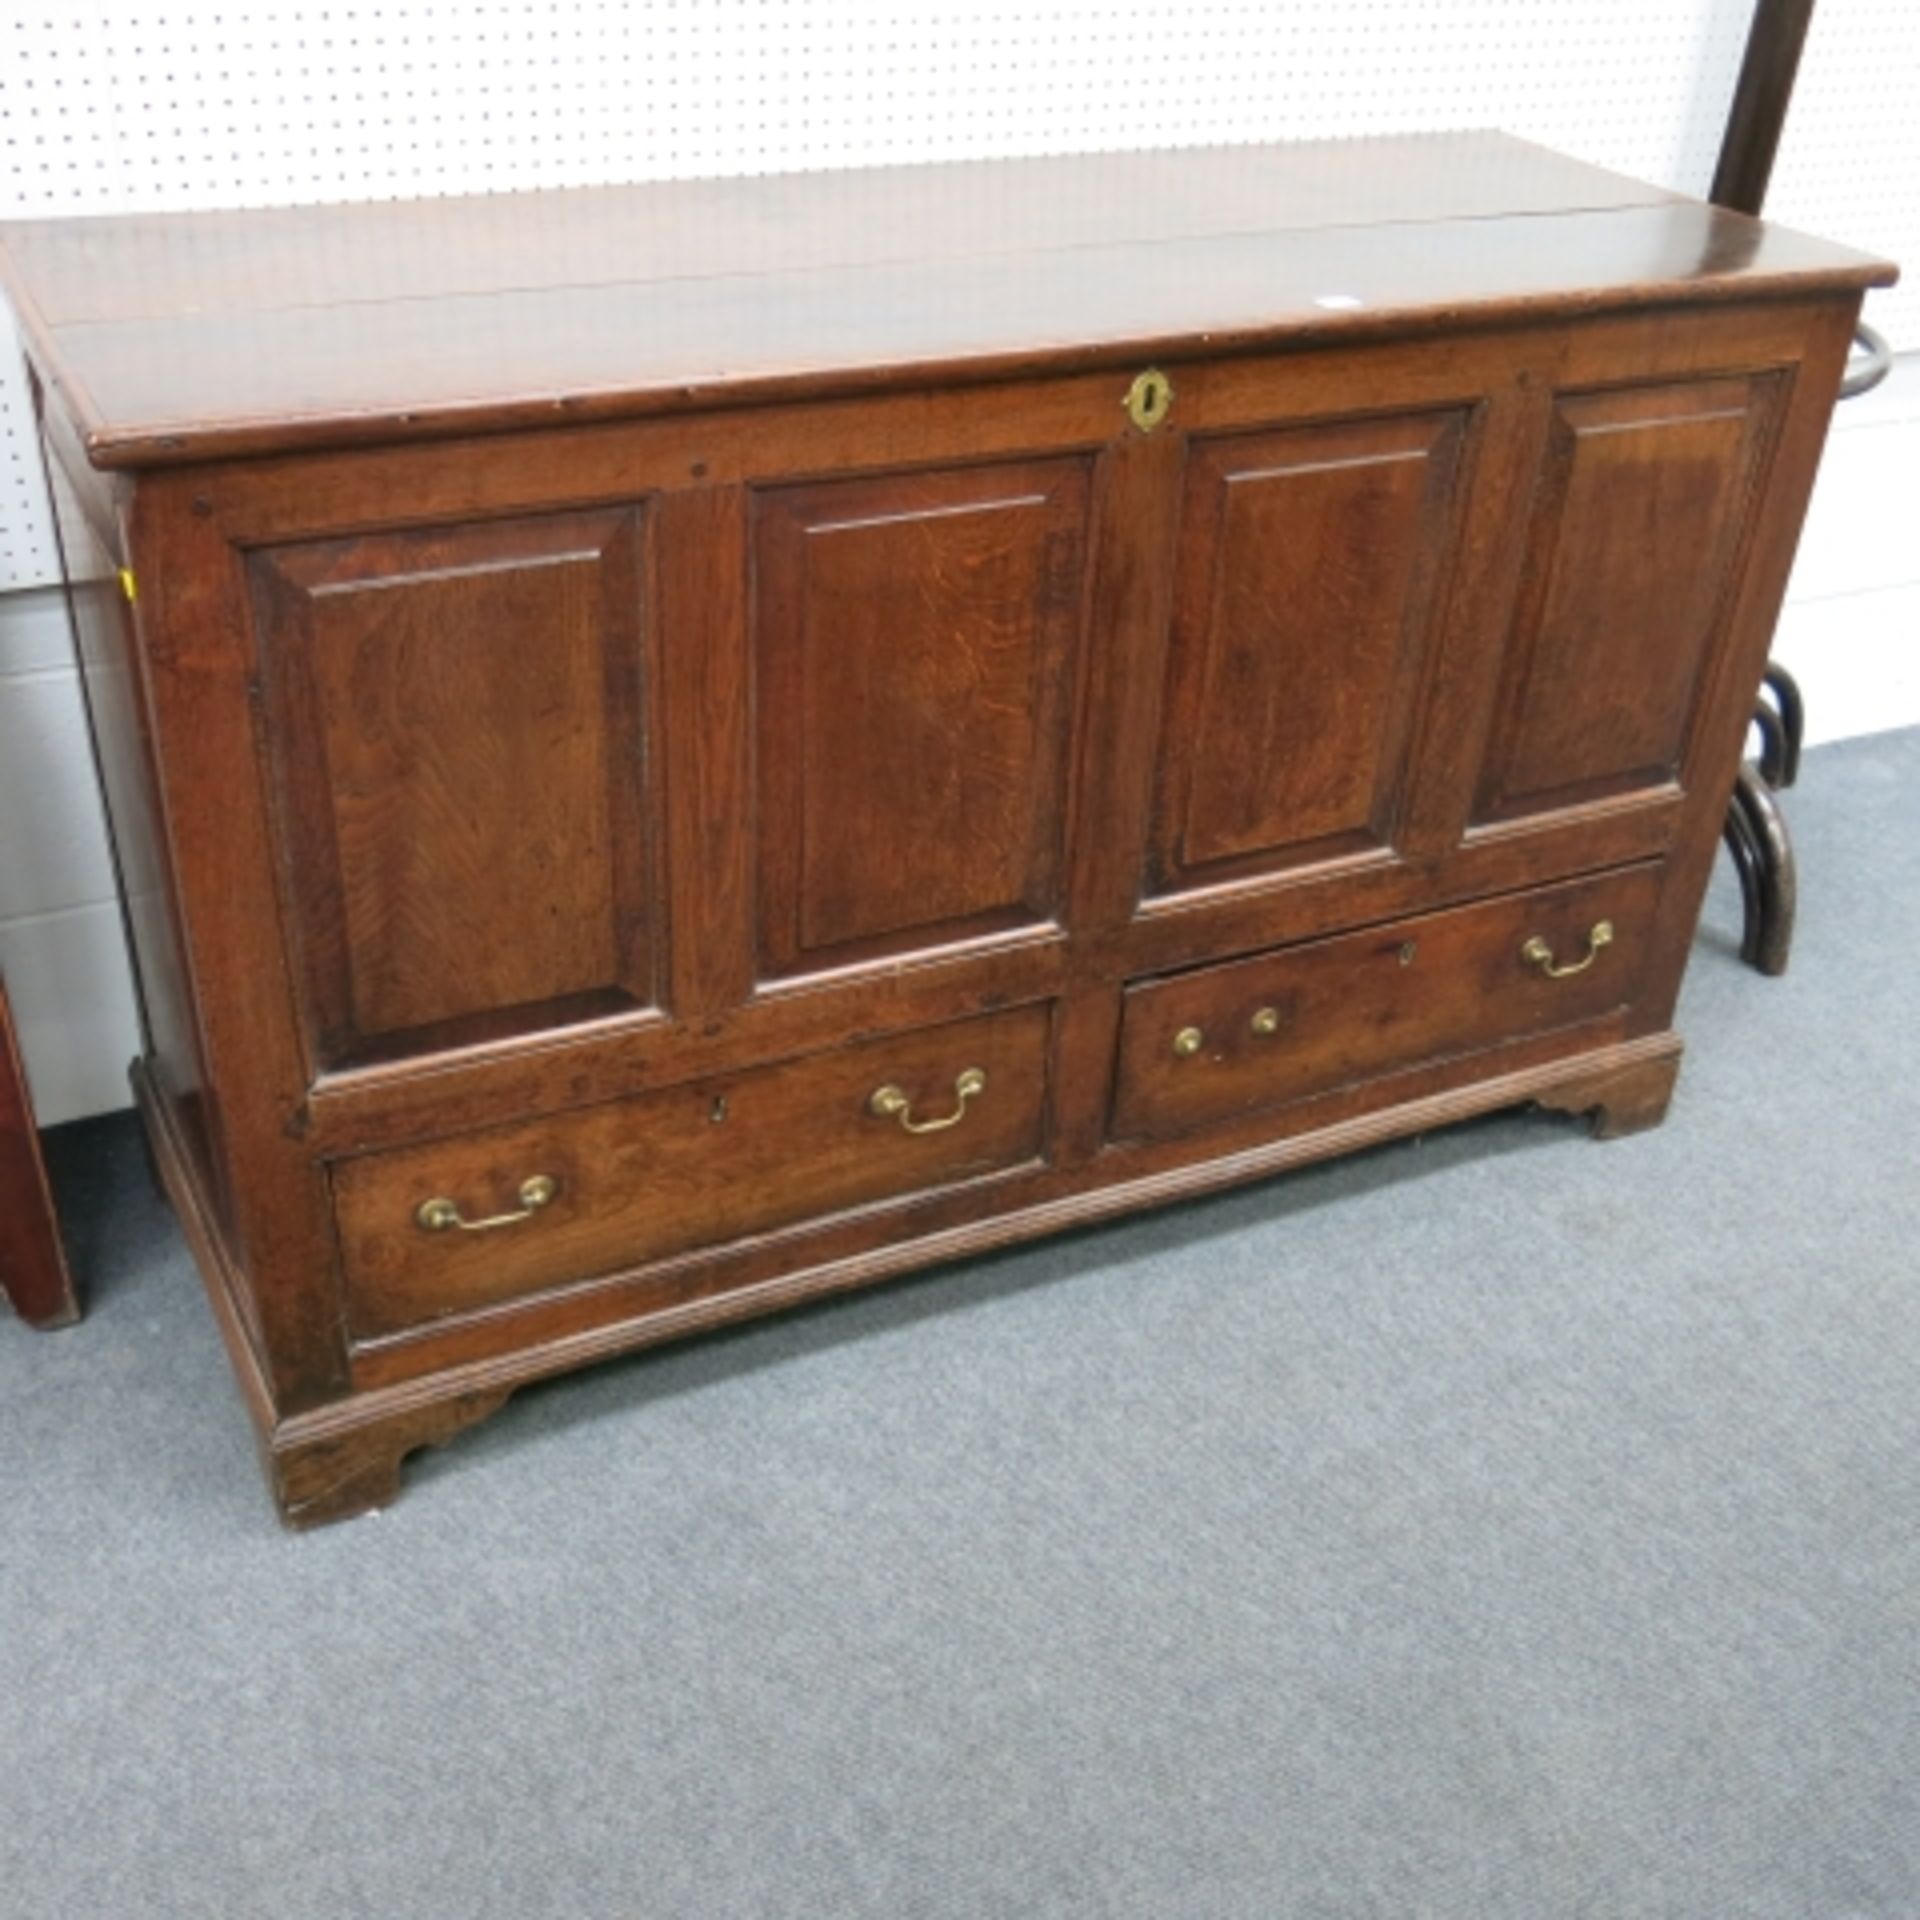 An 18th Century oak mule chest with plain top, panelled front, two drawers and bracket supports